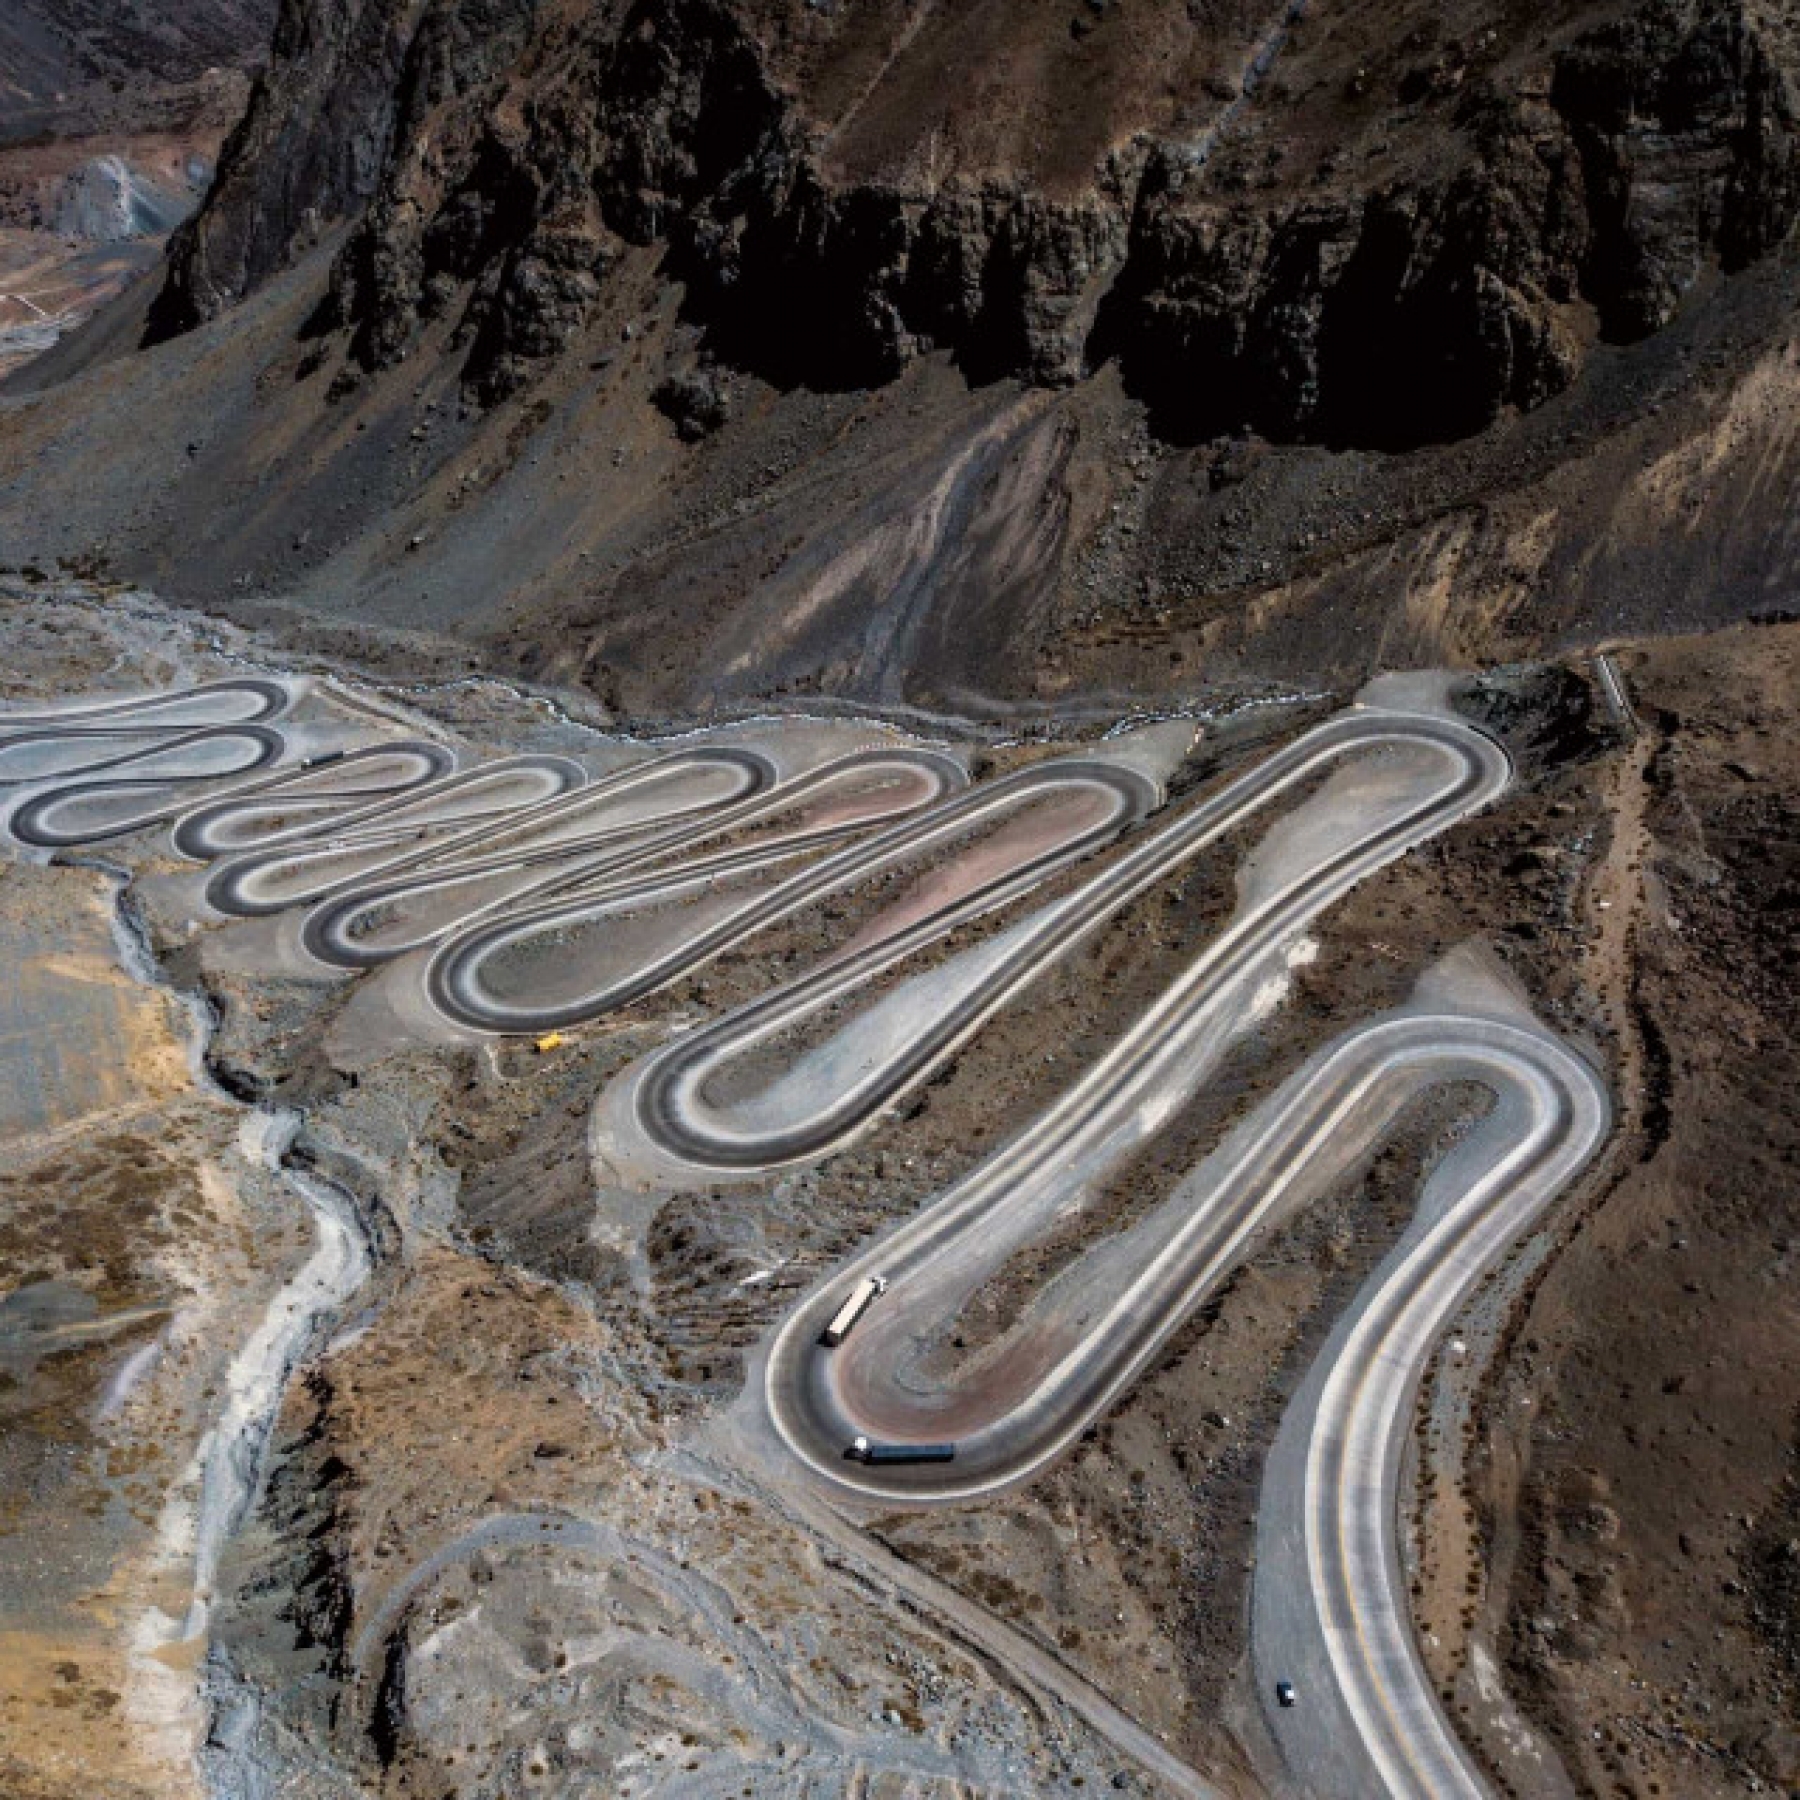 The white-knuckle drive twists along switchbacks and hairpin turns